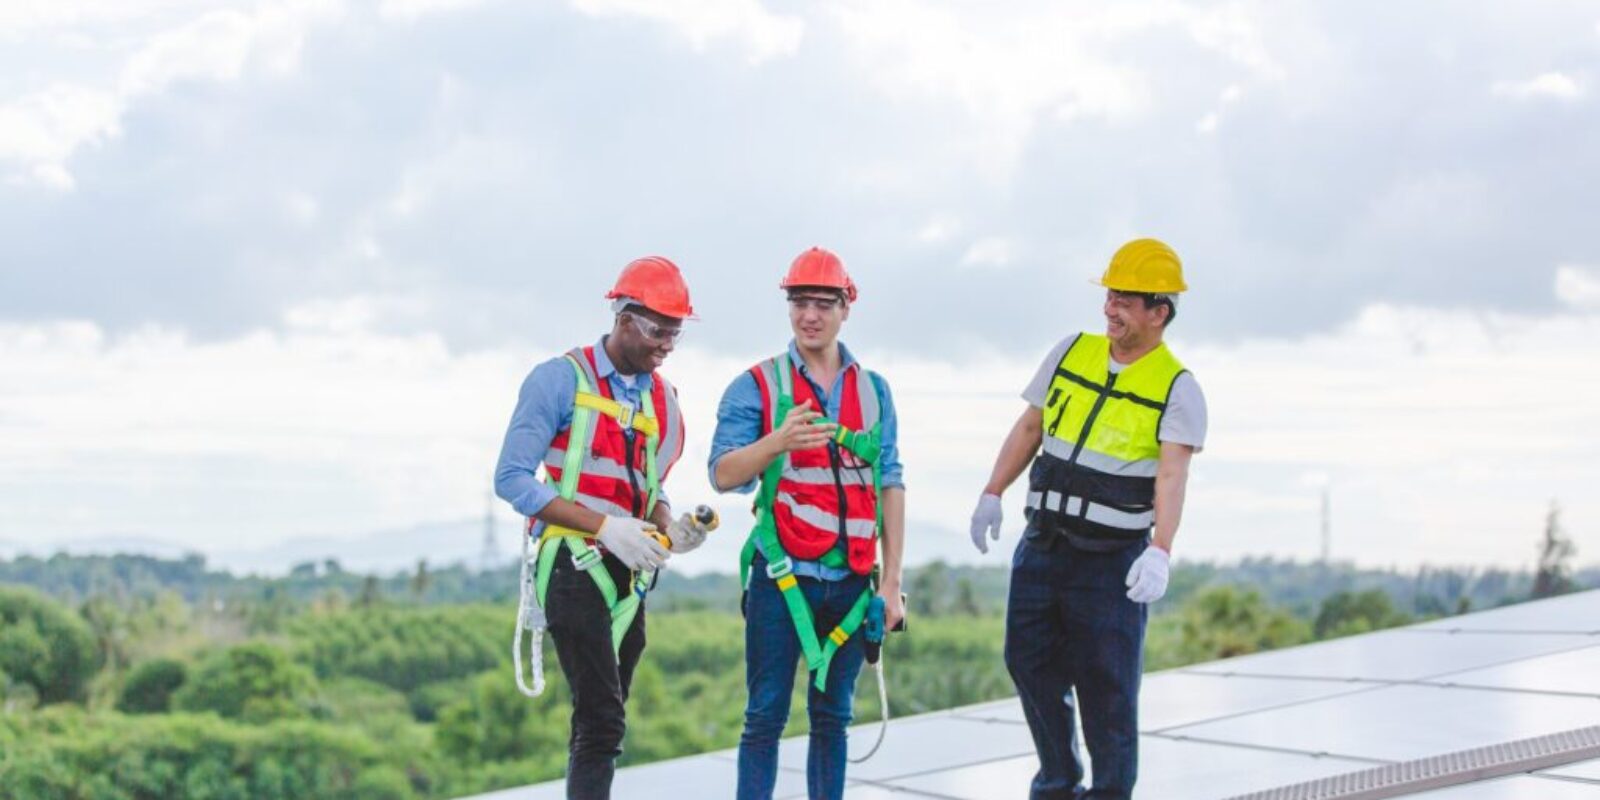 Professional engineer team installing solar photovoltaic panel system, Electrician mounting module